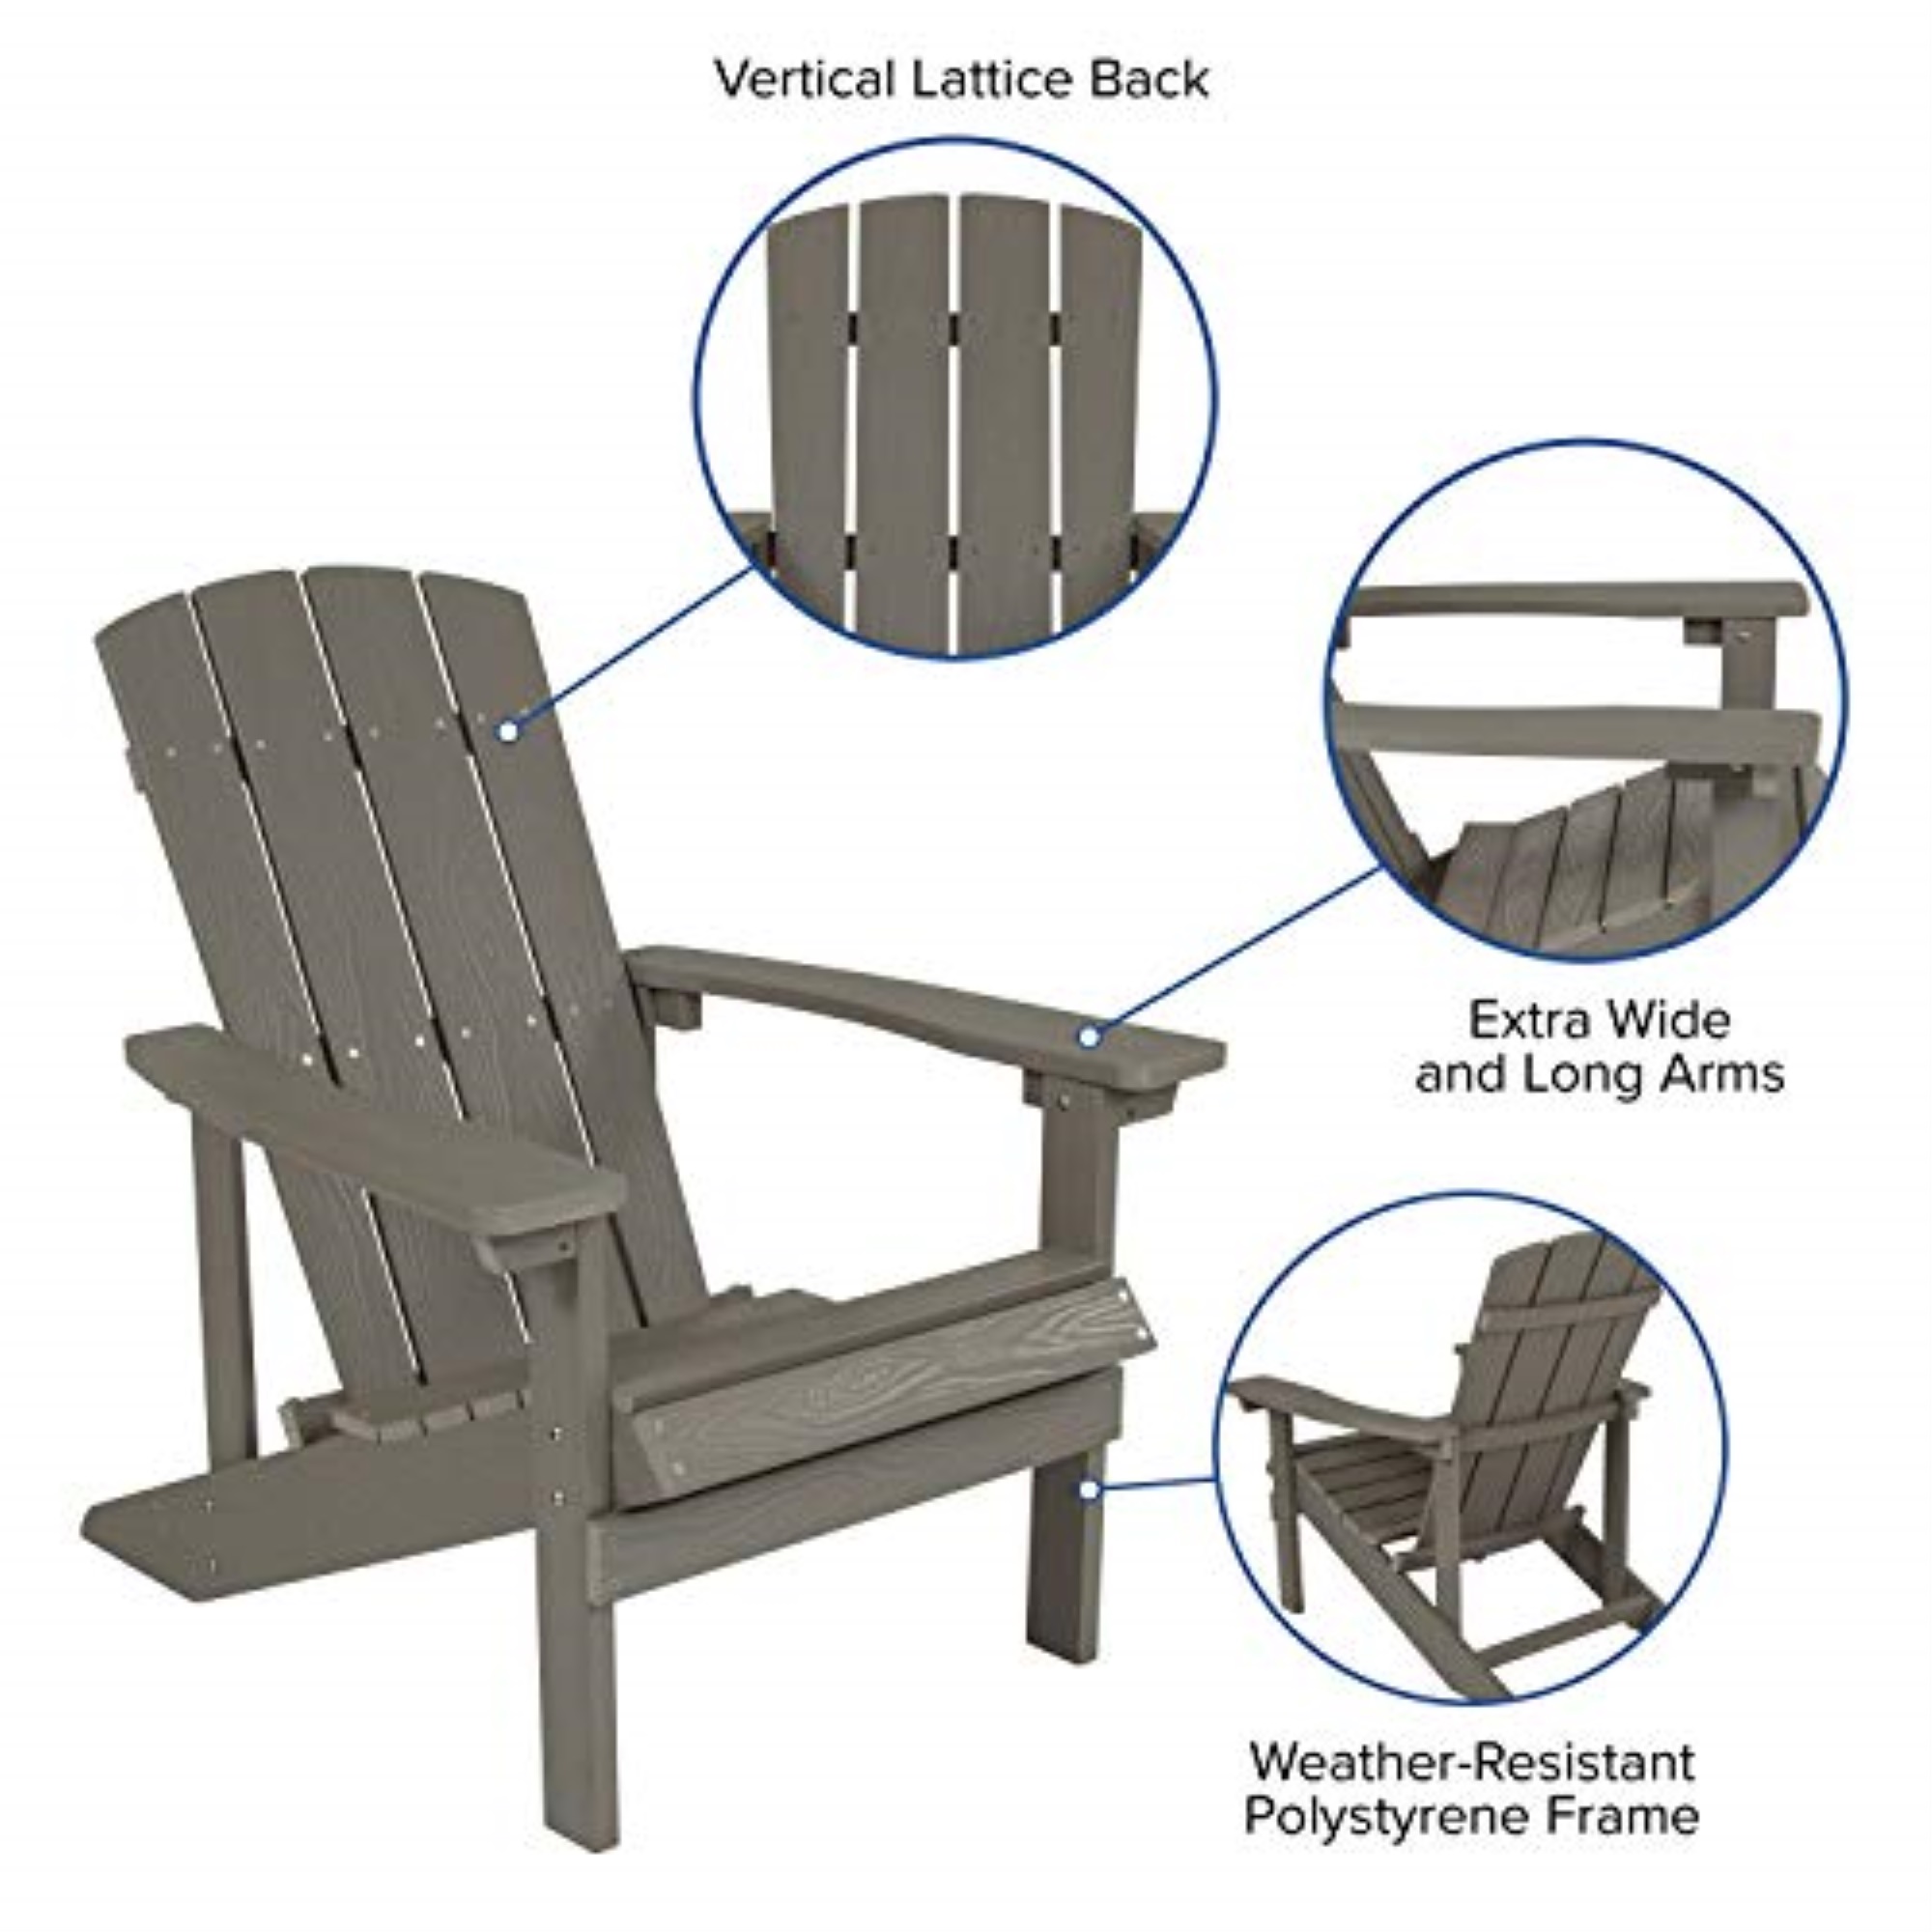 Flash Furniture 5 Piece Charlestown Gray Poly Resin Wood Adirondack Chair Set with Fire Pit - Star and Moon Fire Pit with Mesh Cover